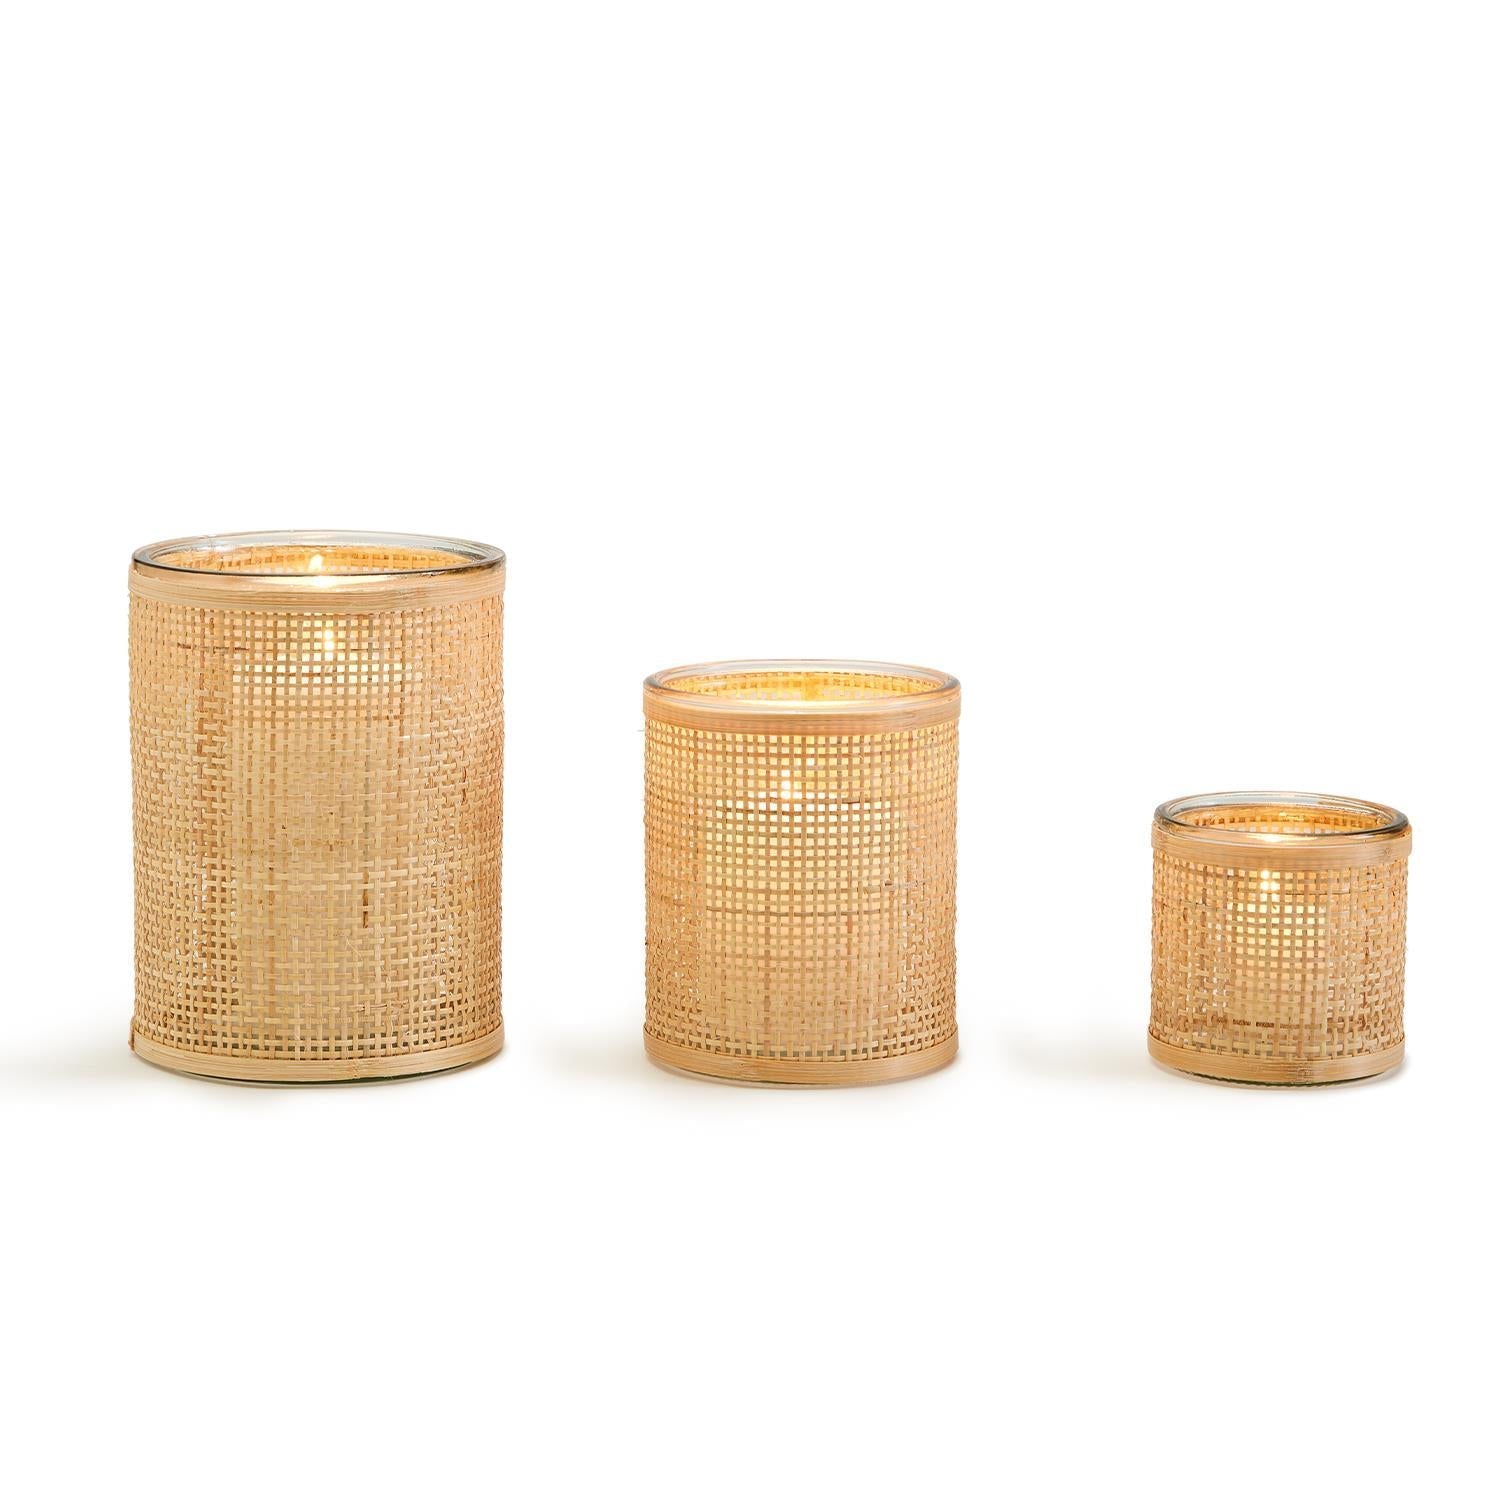 Weaved Rattan Wrapped Cachepot